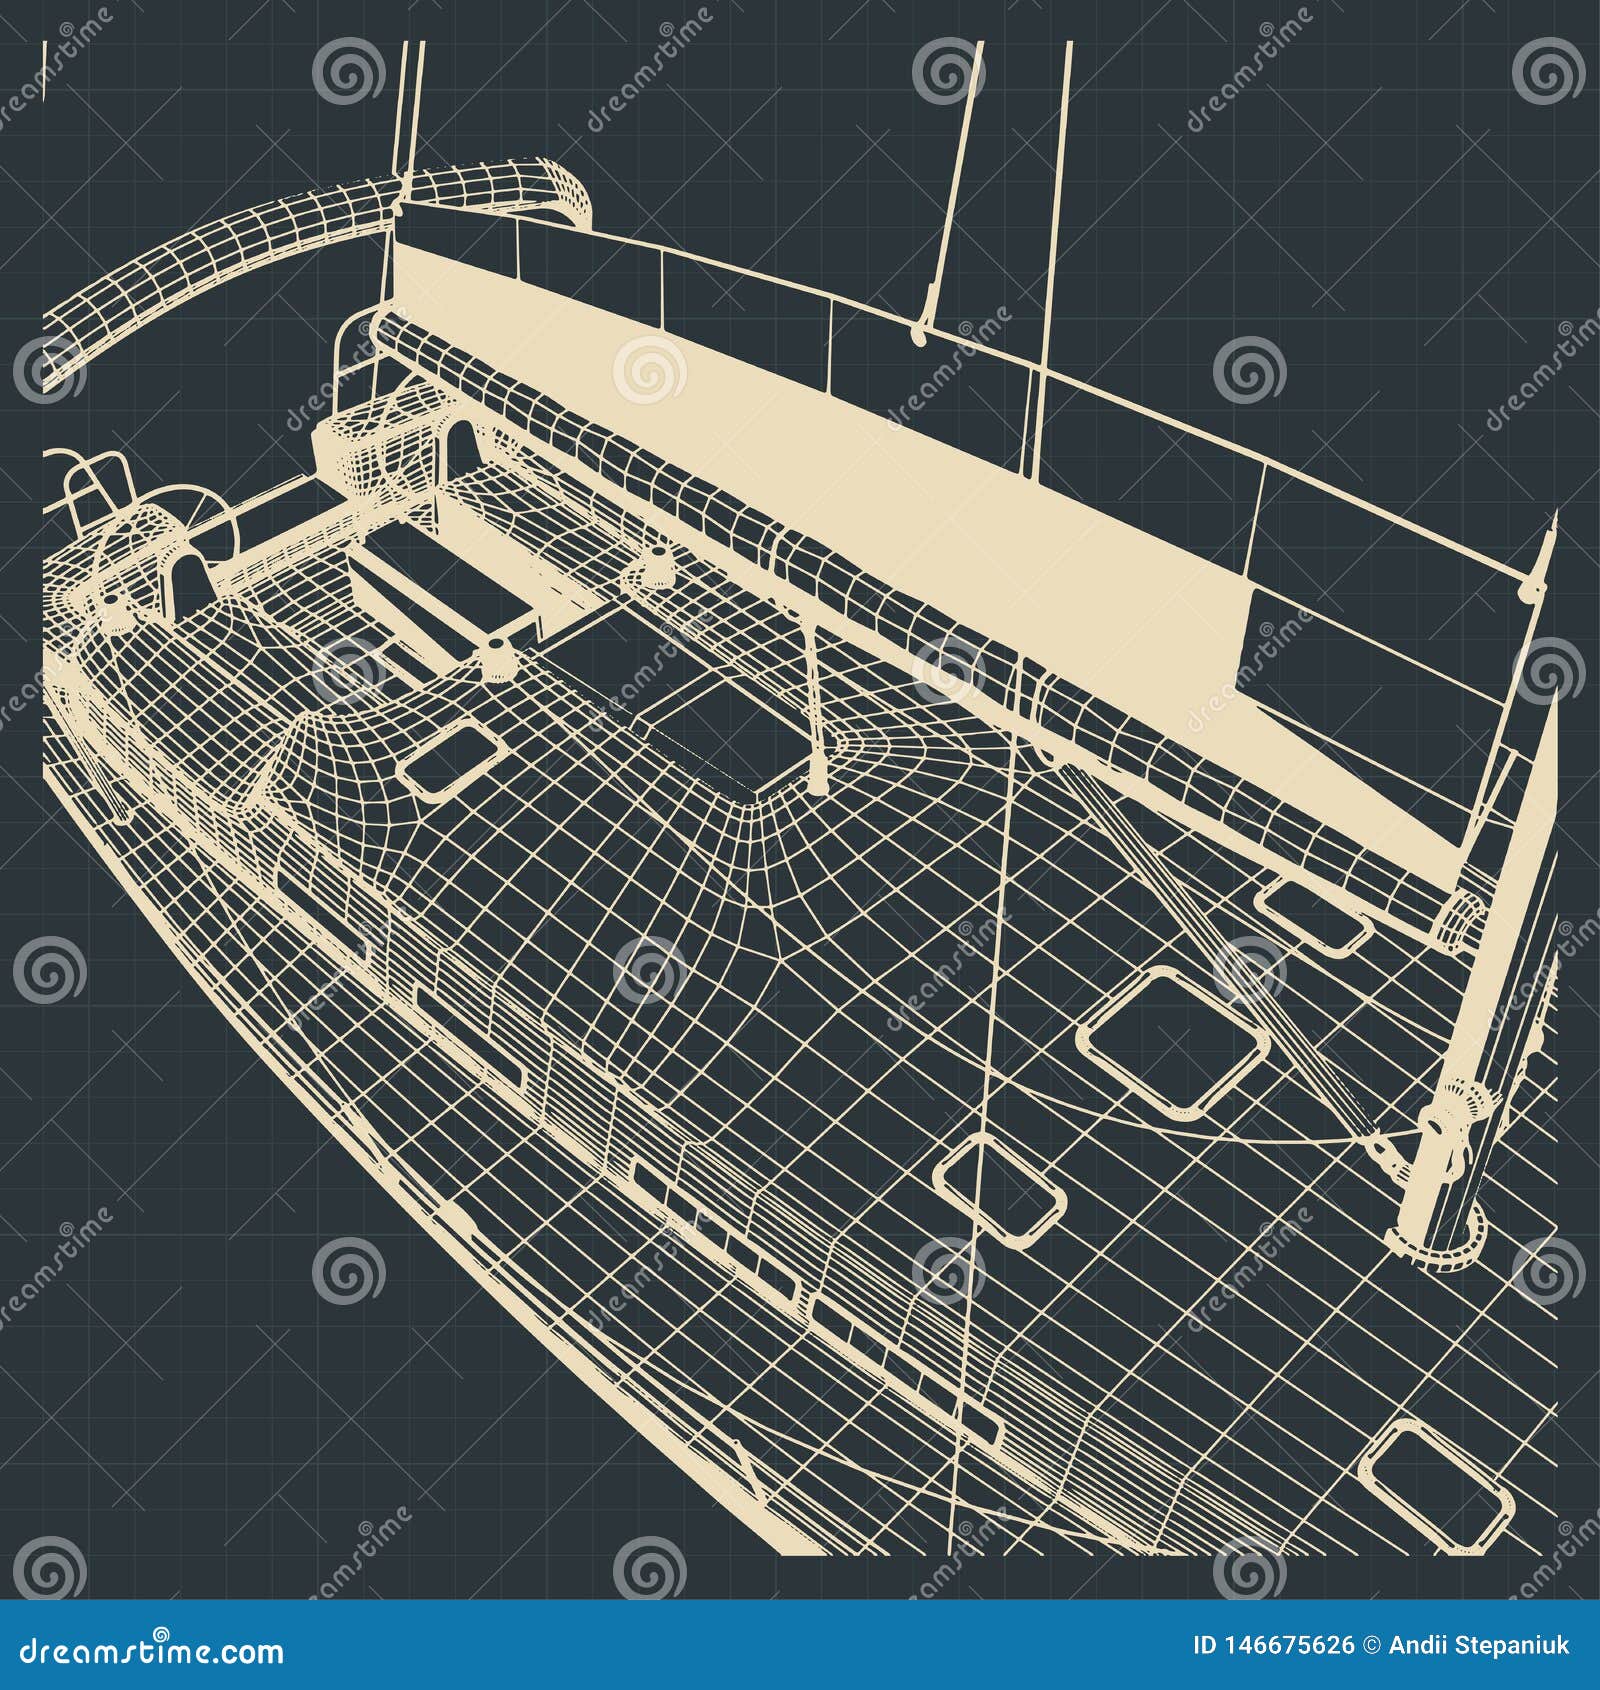 yacht hull outline